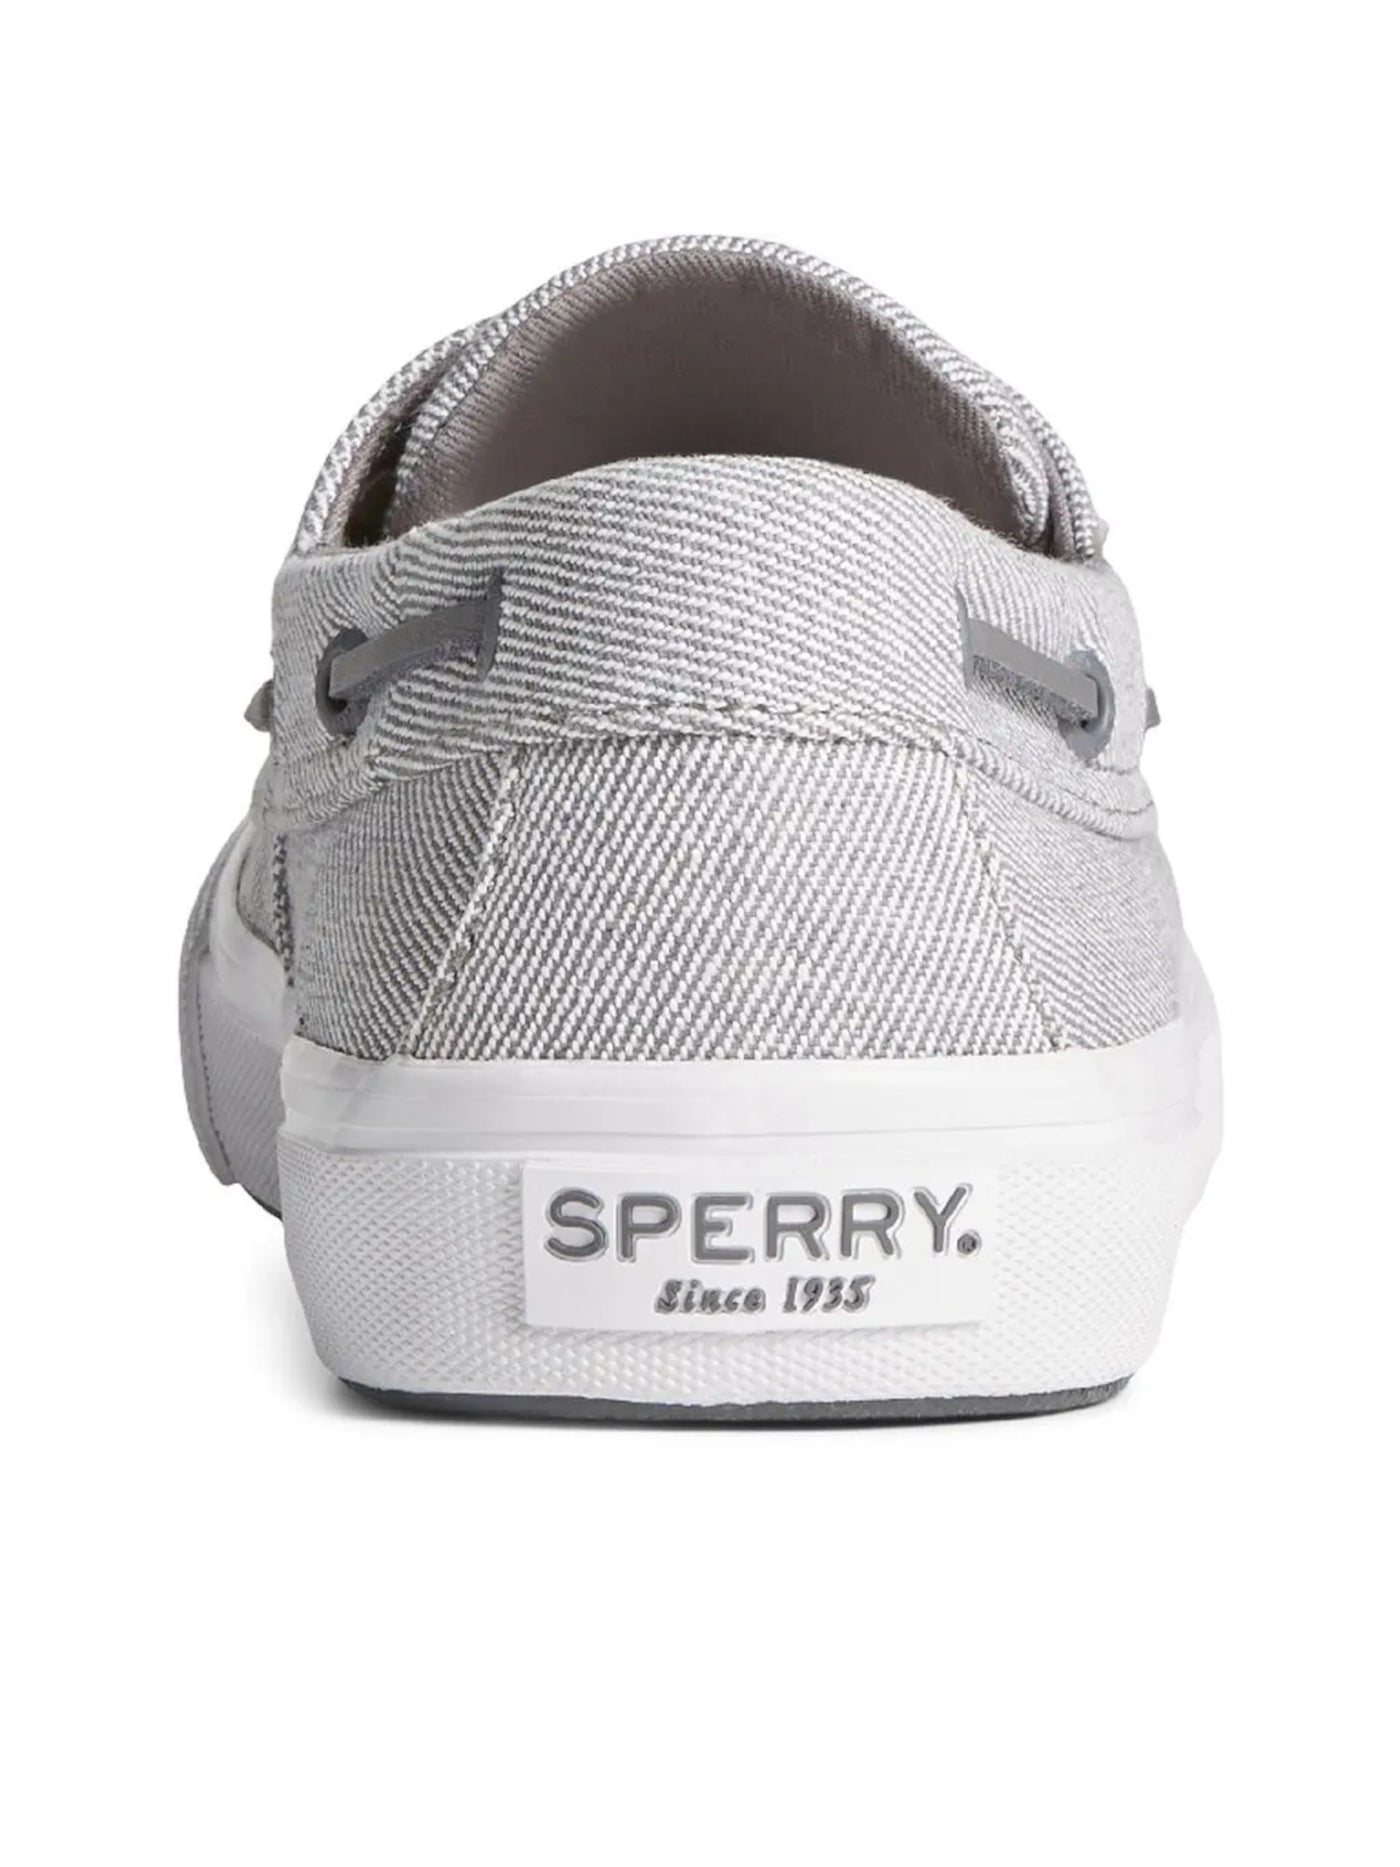 SPERRY Mens Gray Twill Padded Non-Marking Removable Insole Bahama Ii Round Toe Lace-Up Boat Shoes 16